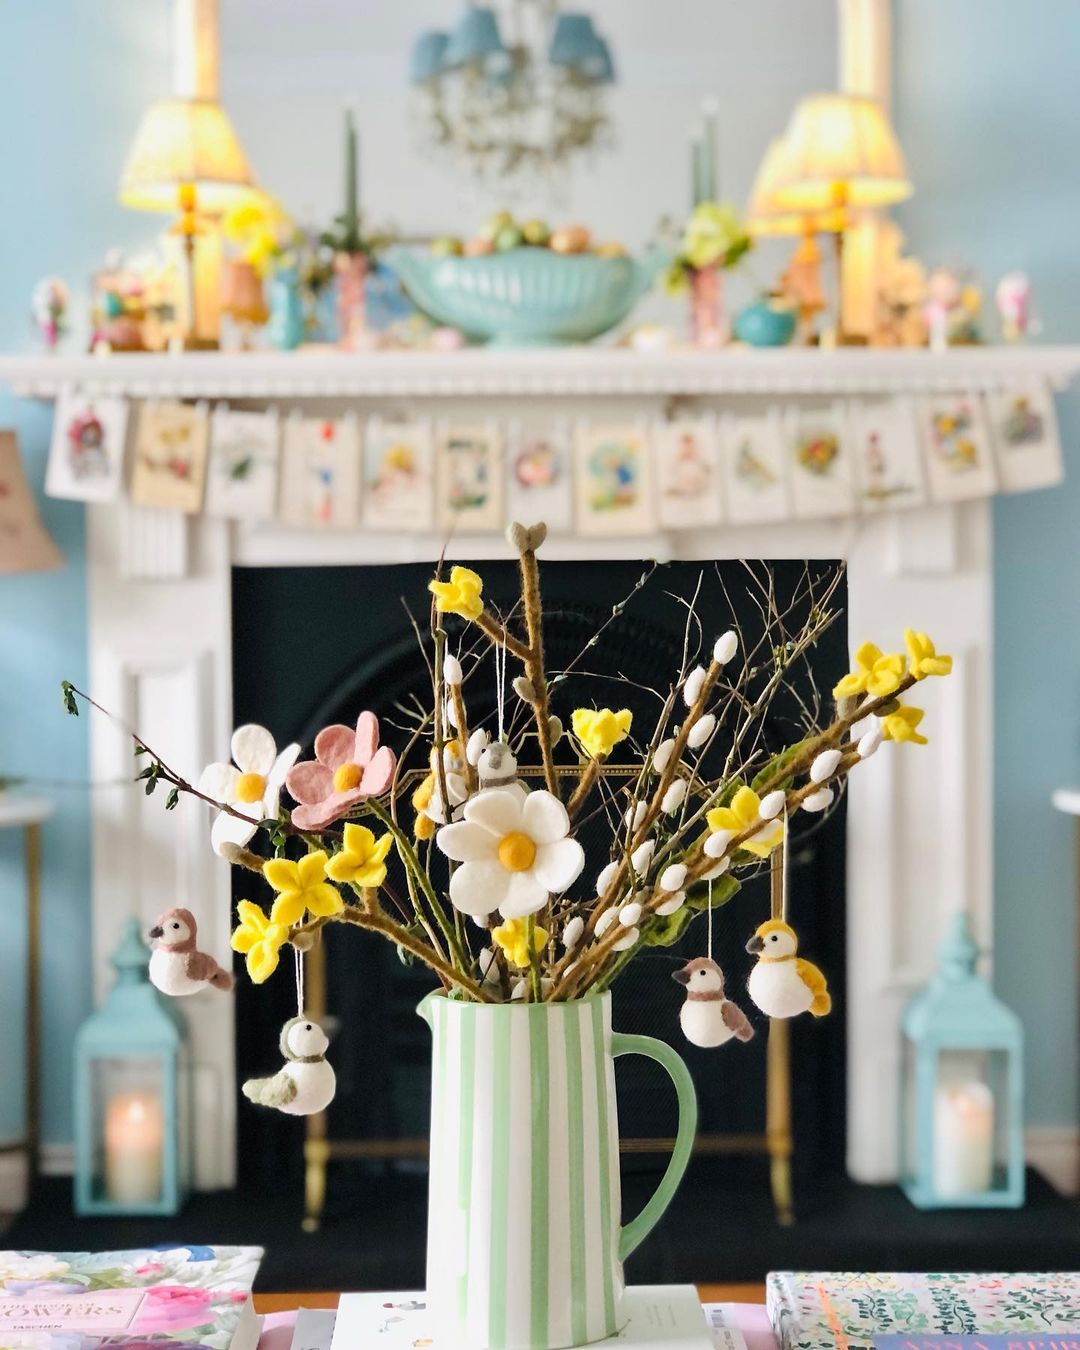 Add Charm with These Quick and Easy Seasonal Decor Hacks